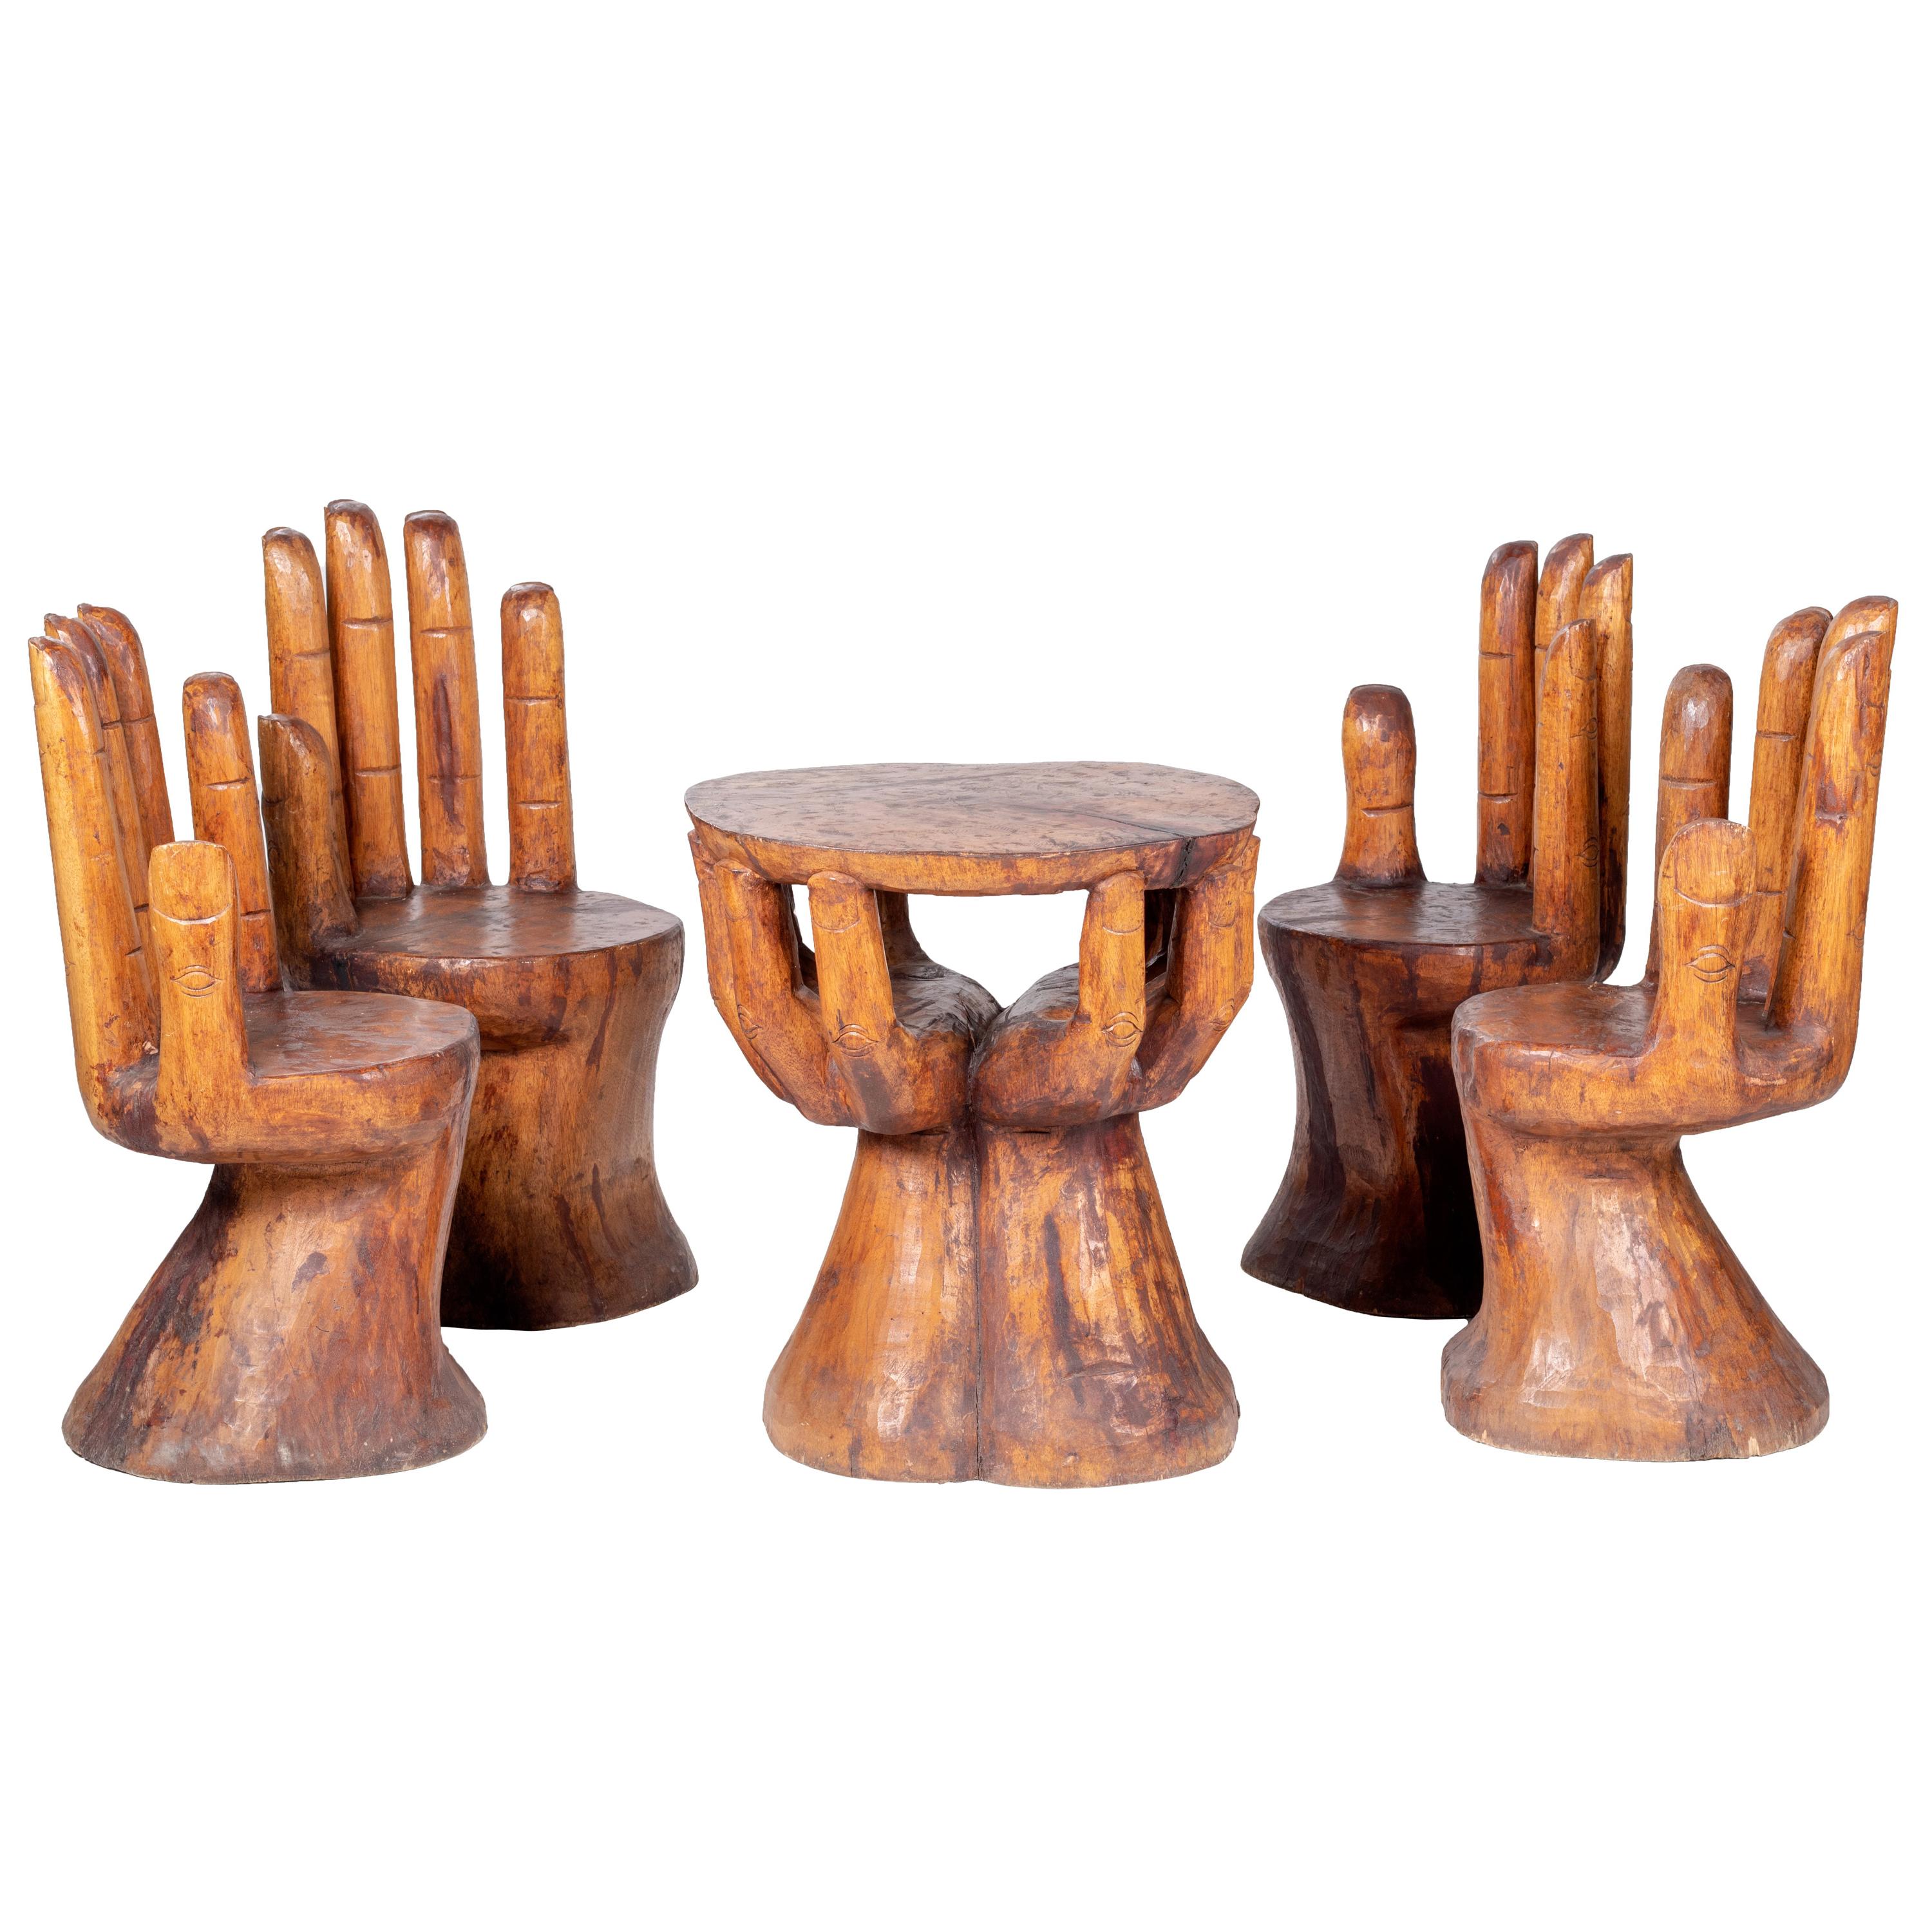 Hand Shaped Fruit Wood Set of Table and Four Chairs